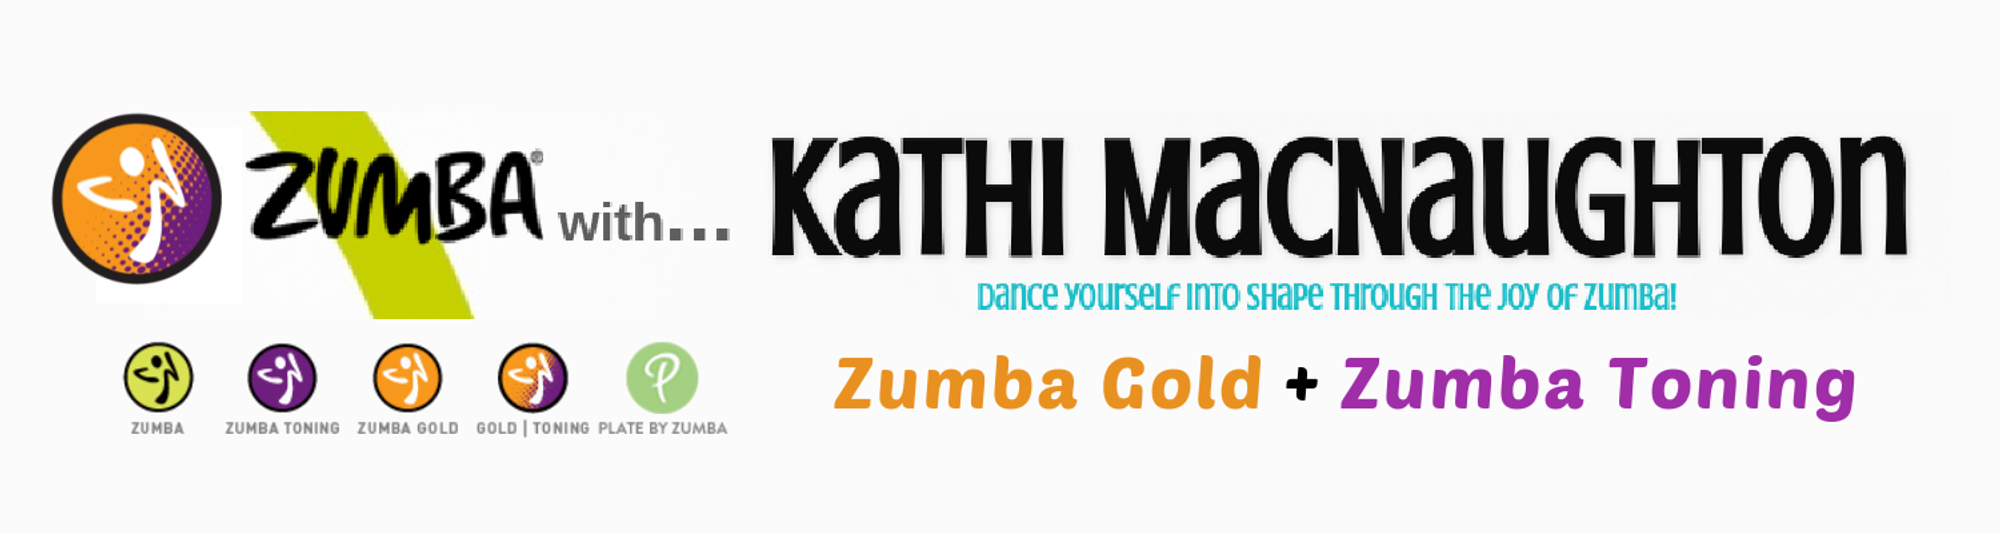 Zumba Gold Is for Everyone!